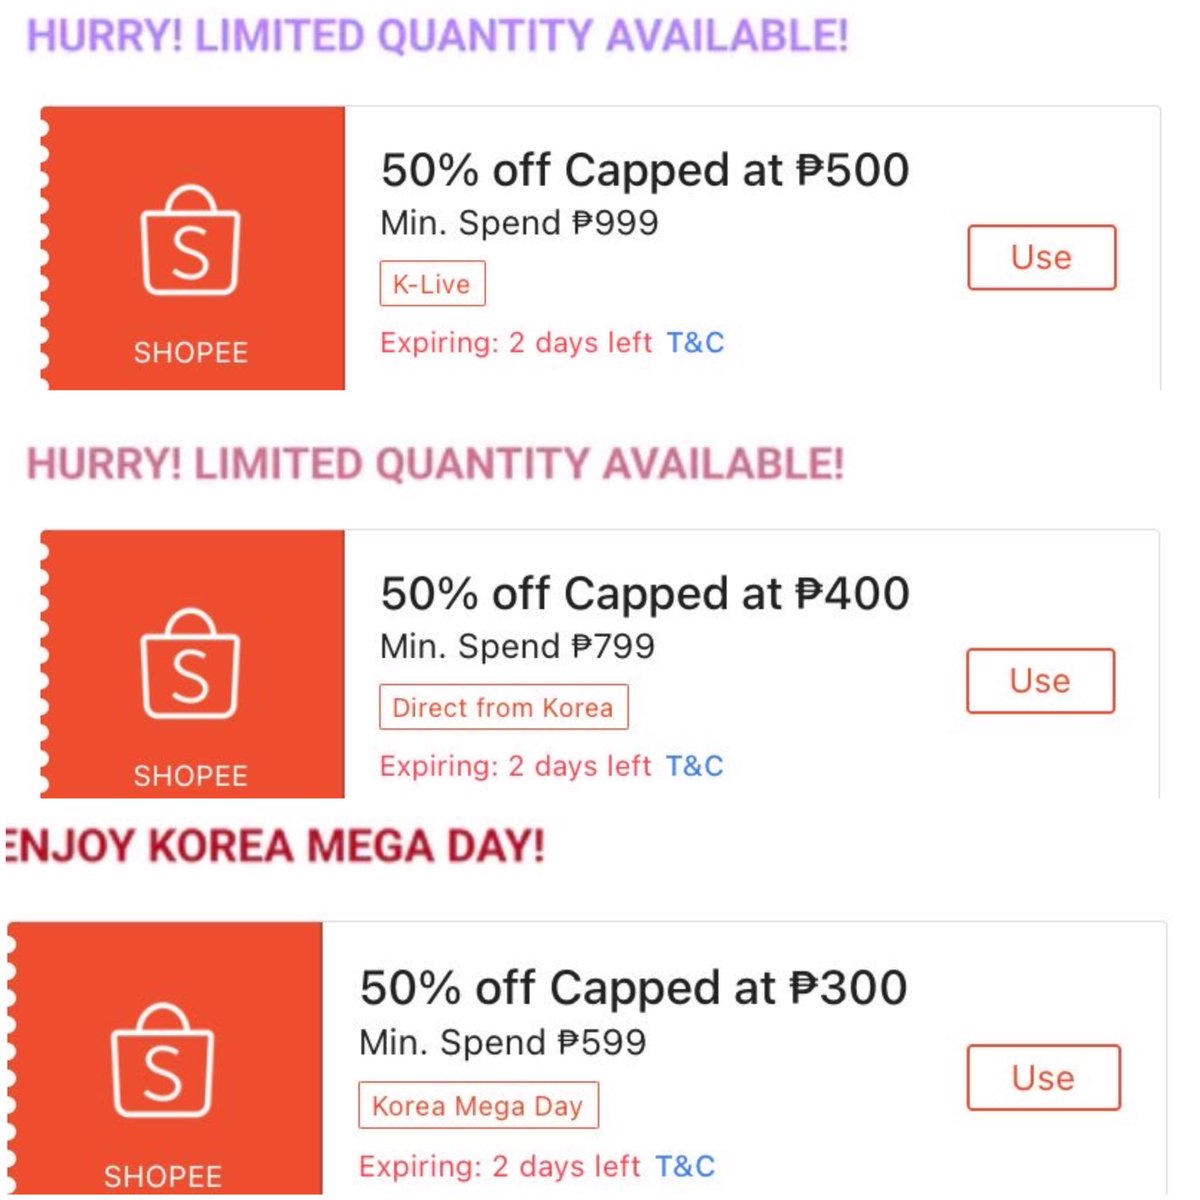 KOREA MEGA DAY & KLIVE VOUCHERS! 🇰🇷

claim here:
₱500 off: shope.ee/8A9Jzjqwsz
₱400 off: shope.ee/2VUxFW3Cni
₱300 off: shope.ee/6AOFbawwMq

use here: shope.ee/qMYcFRn9v

REPOST TO SPREAD! will give pagc@sh sa lucky sharers!!